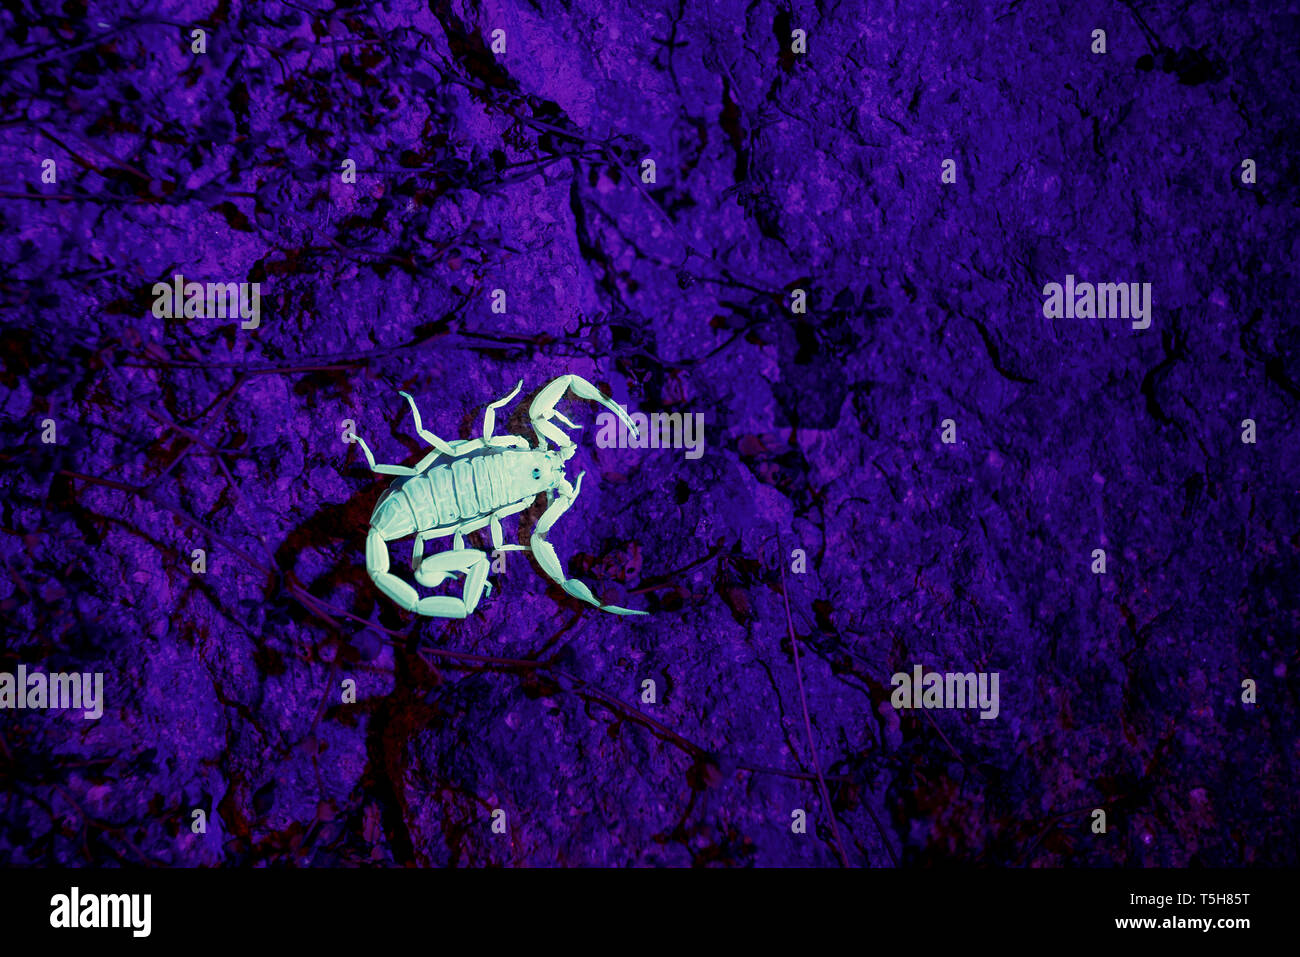 Scorpion as seen at night with a black light, Baja California Sur, Mexico. Stock Photo